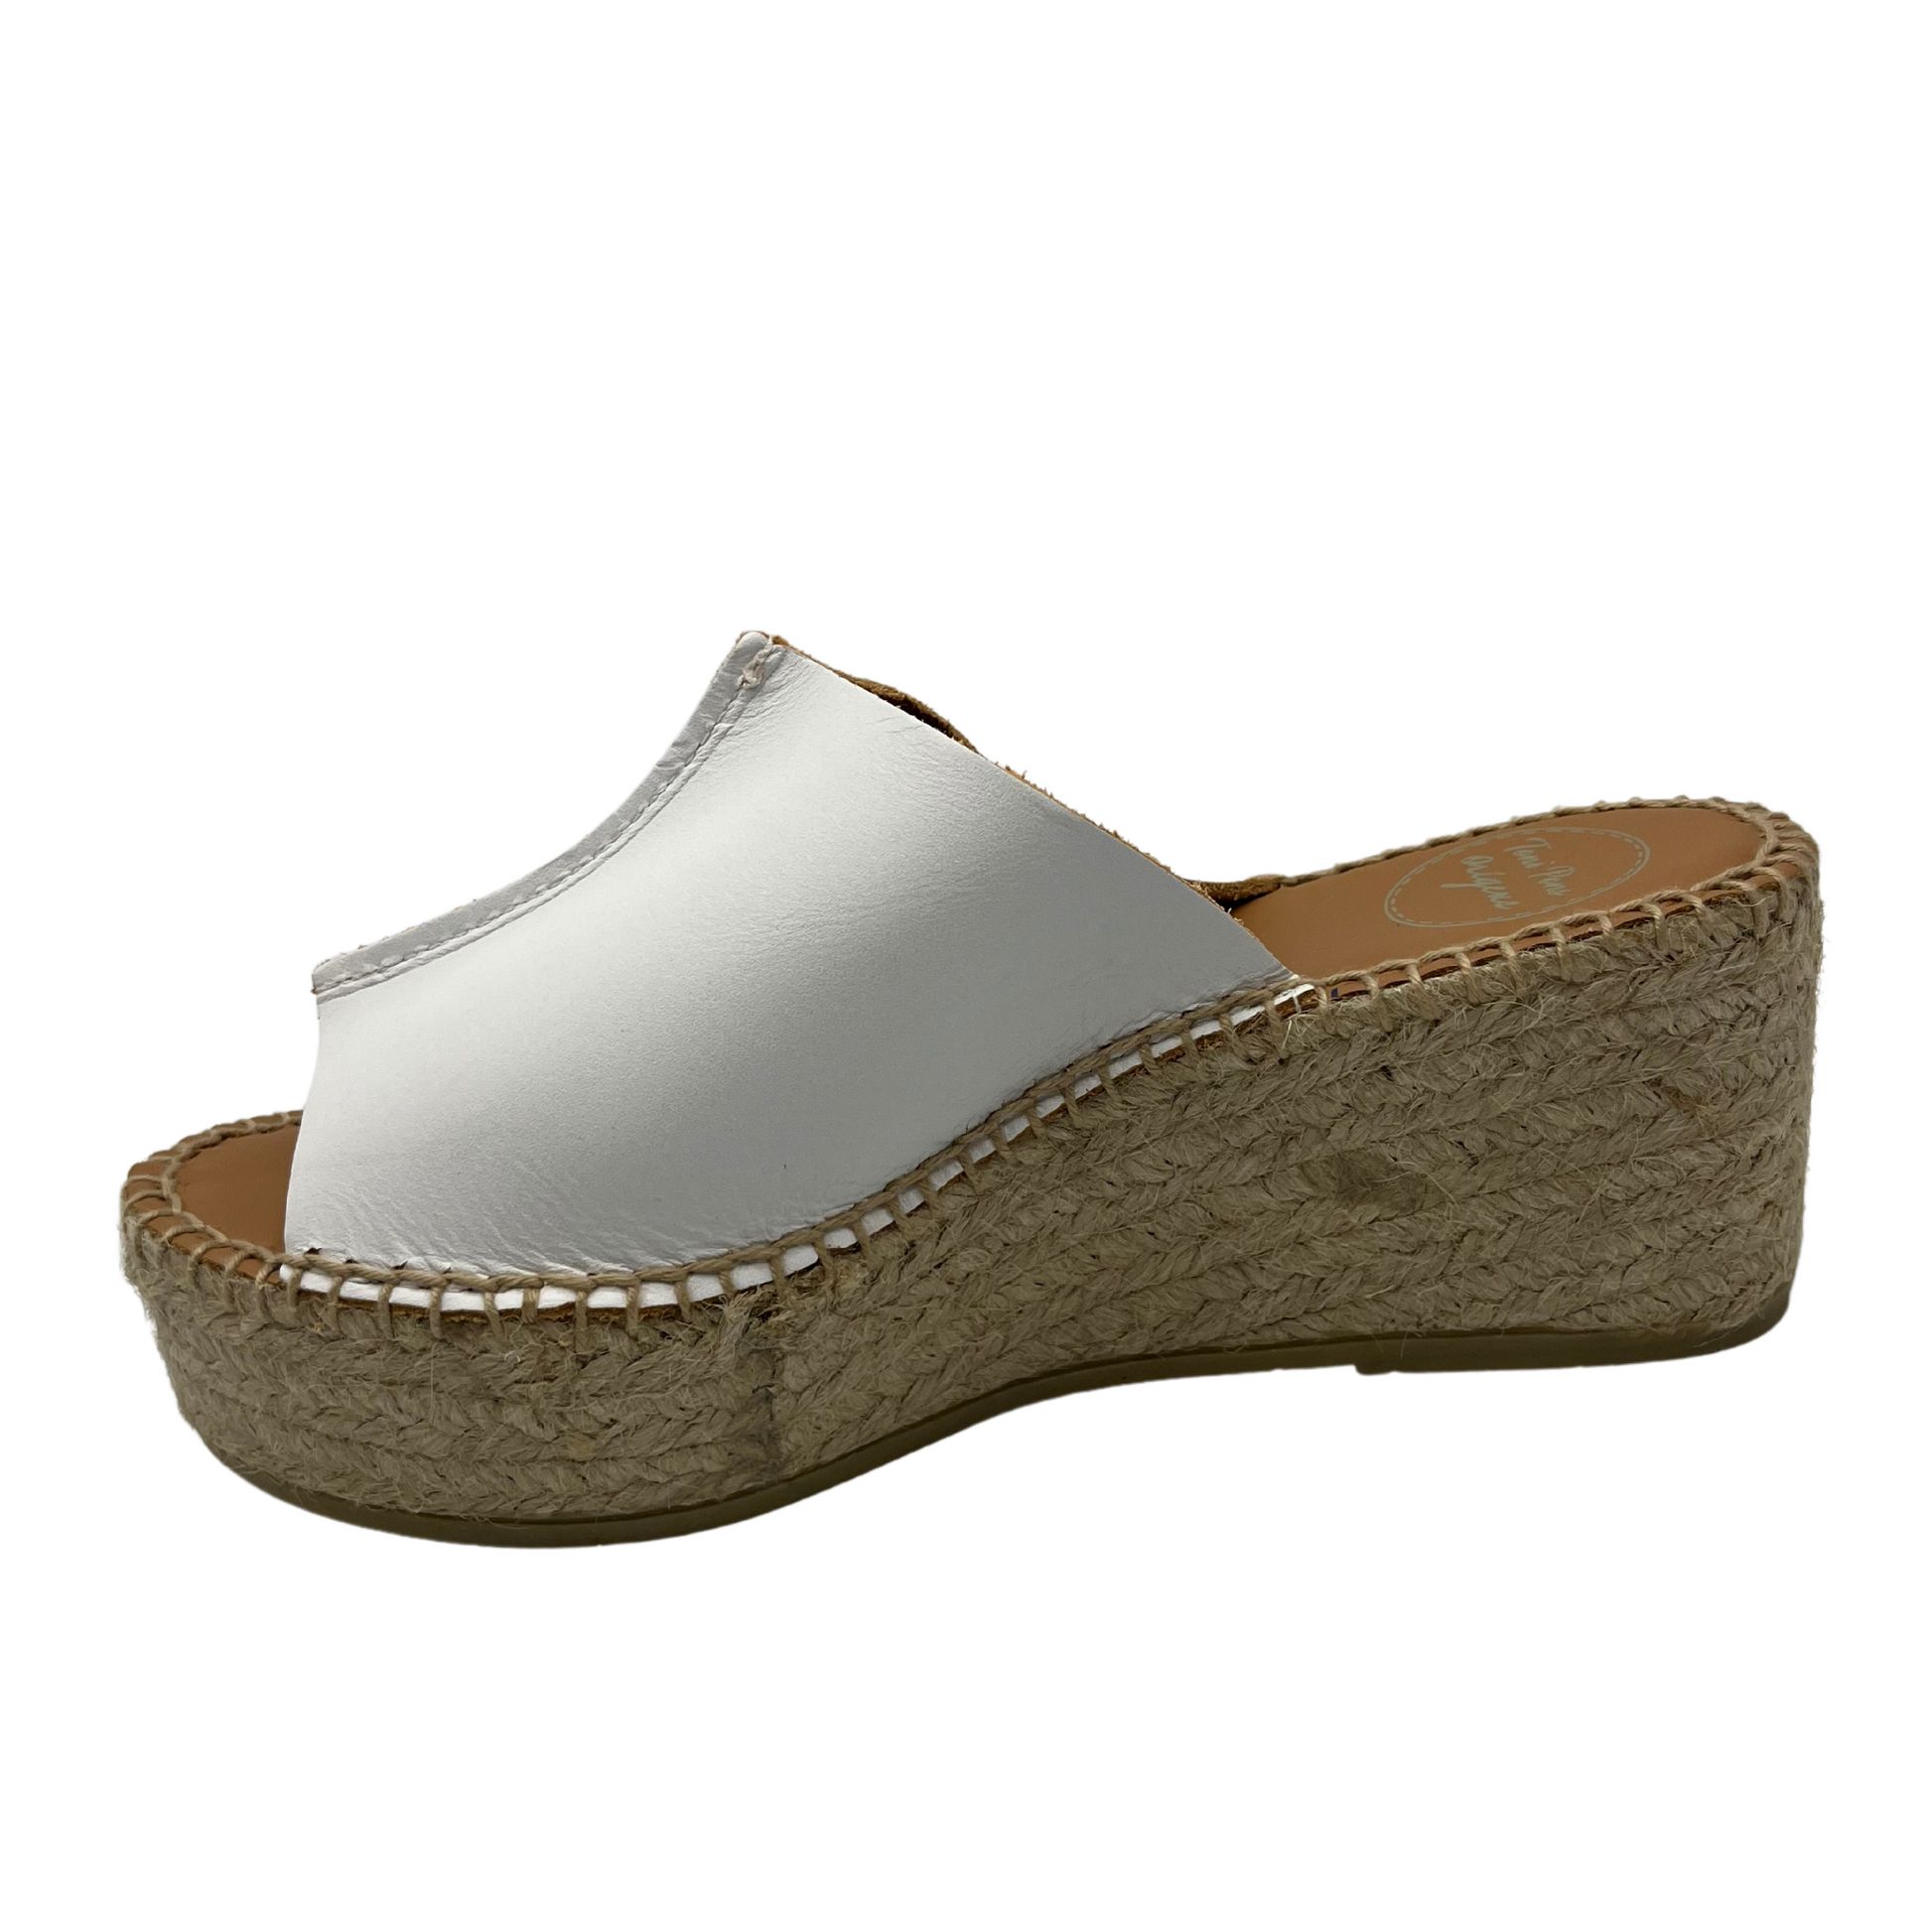 Left facing view of white leather espadrille sandal with wedge heel and handstitching around sole